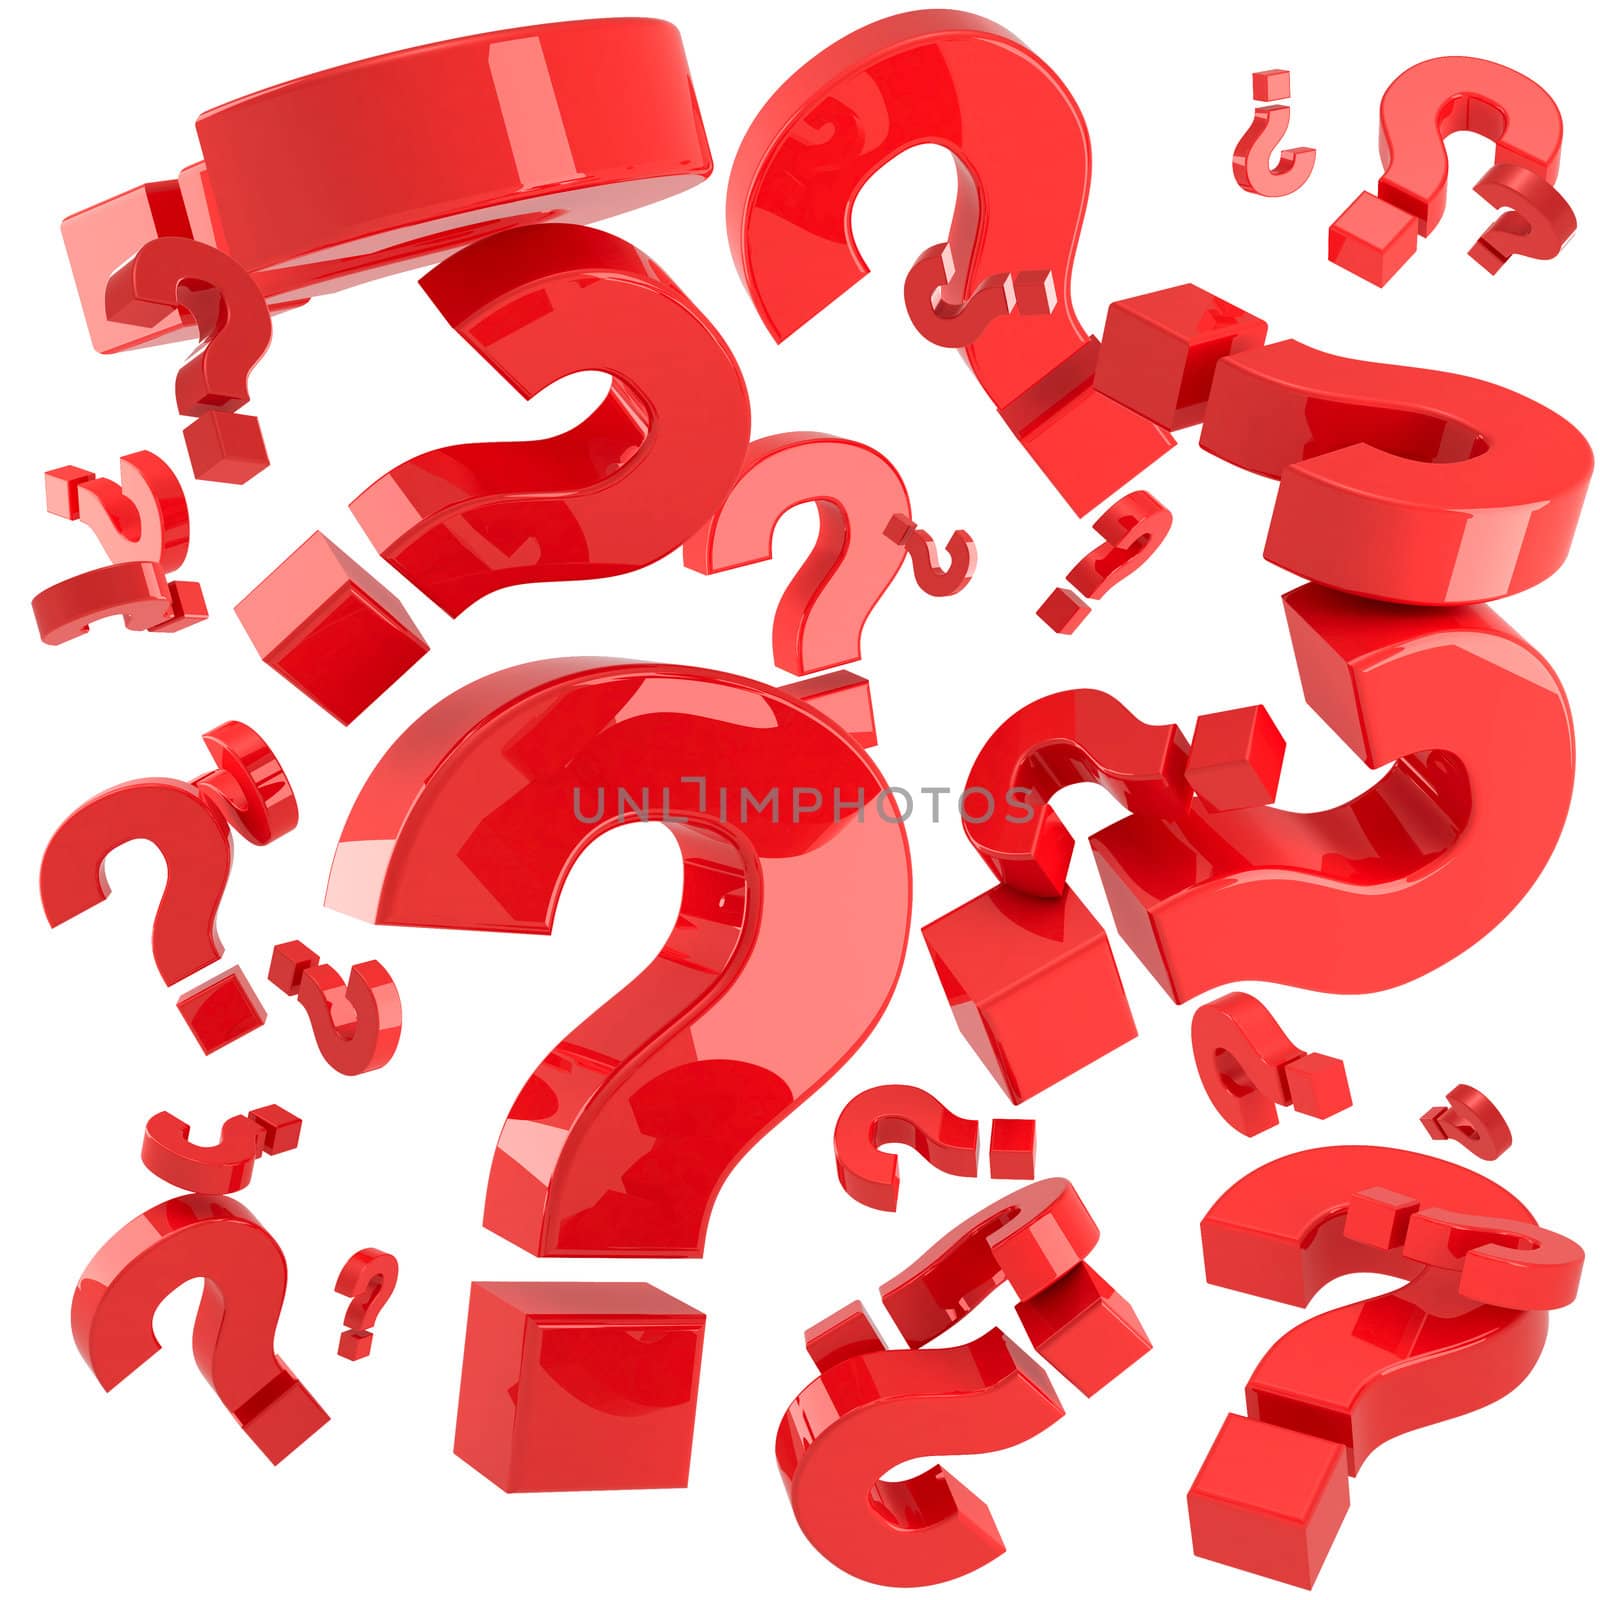 A lot of red question marks isolated on the white background